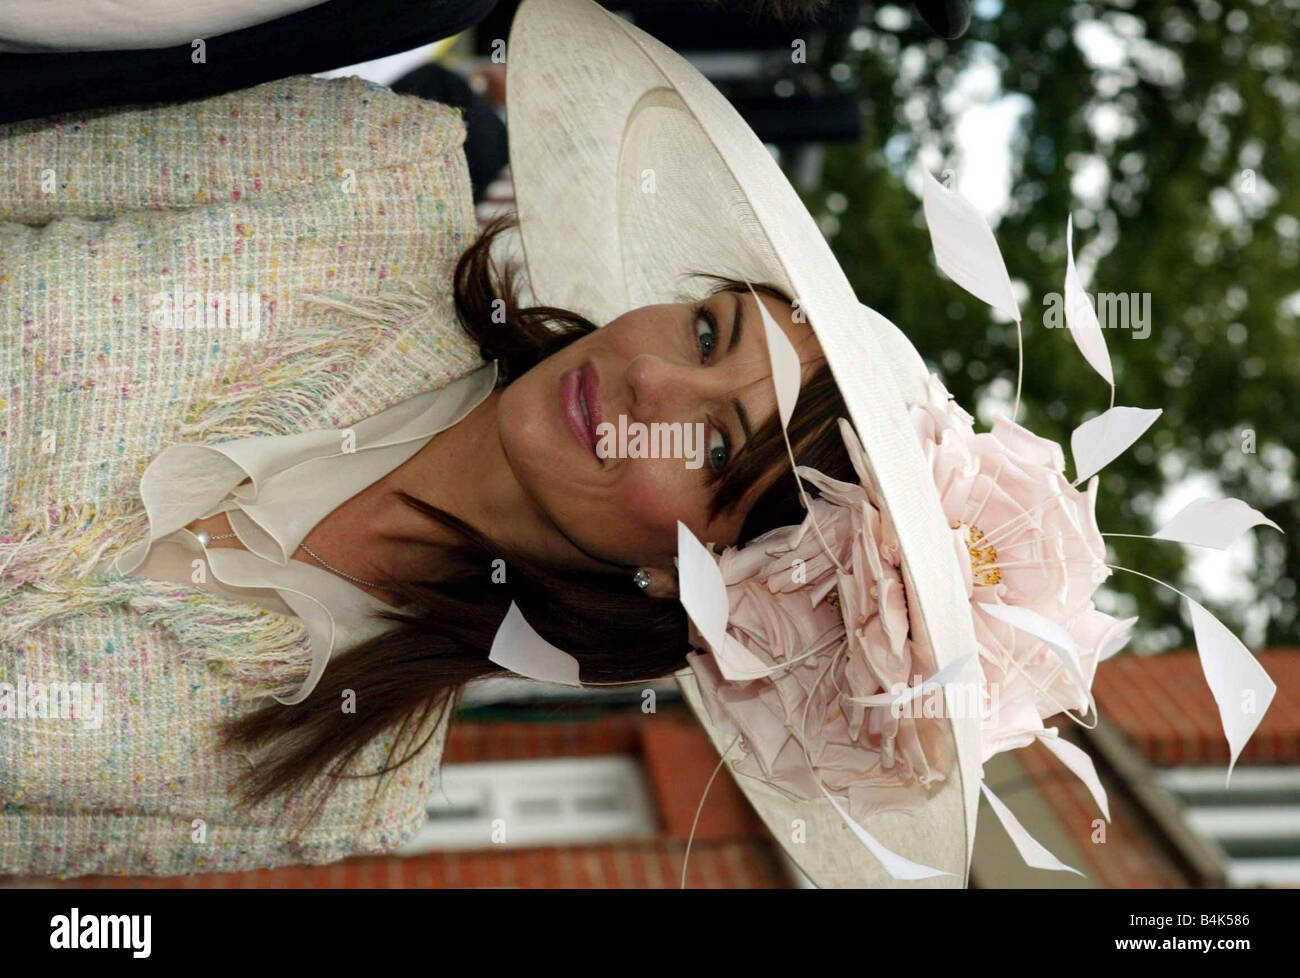 Actress Liz Hurley arrives at Ascot wearing a white hat June 2004 Stock Photo